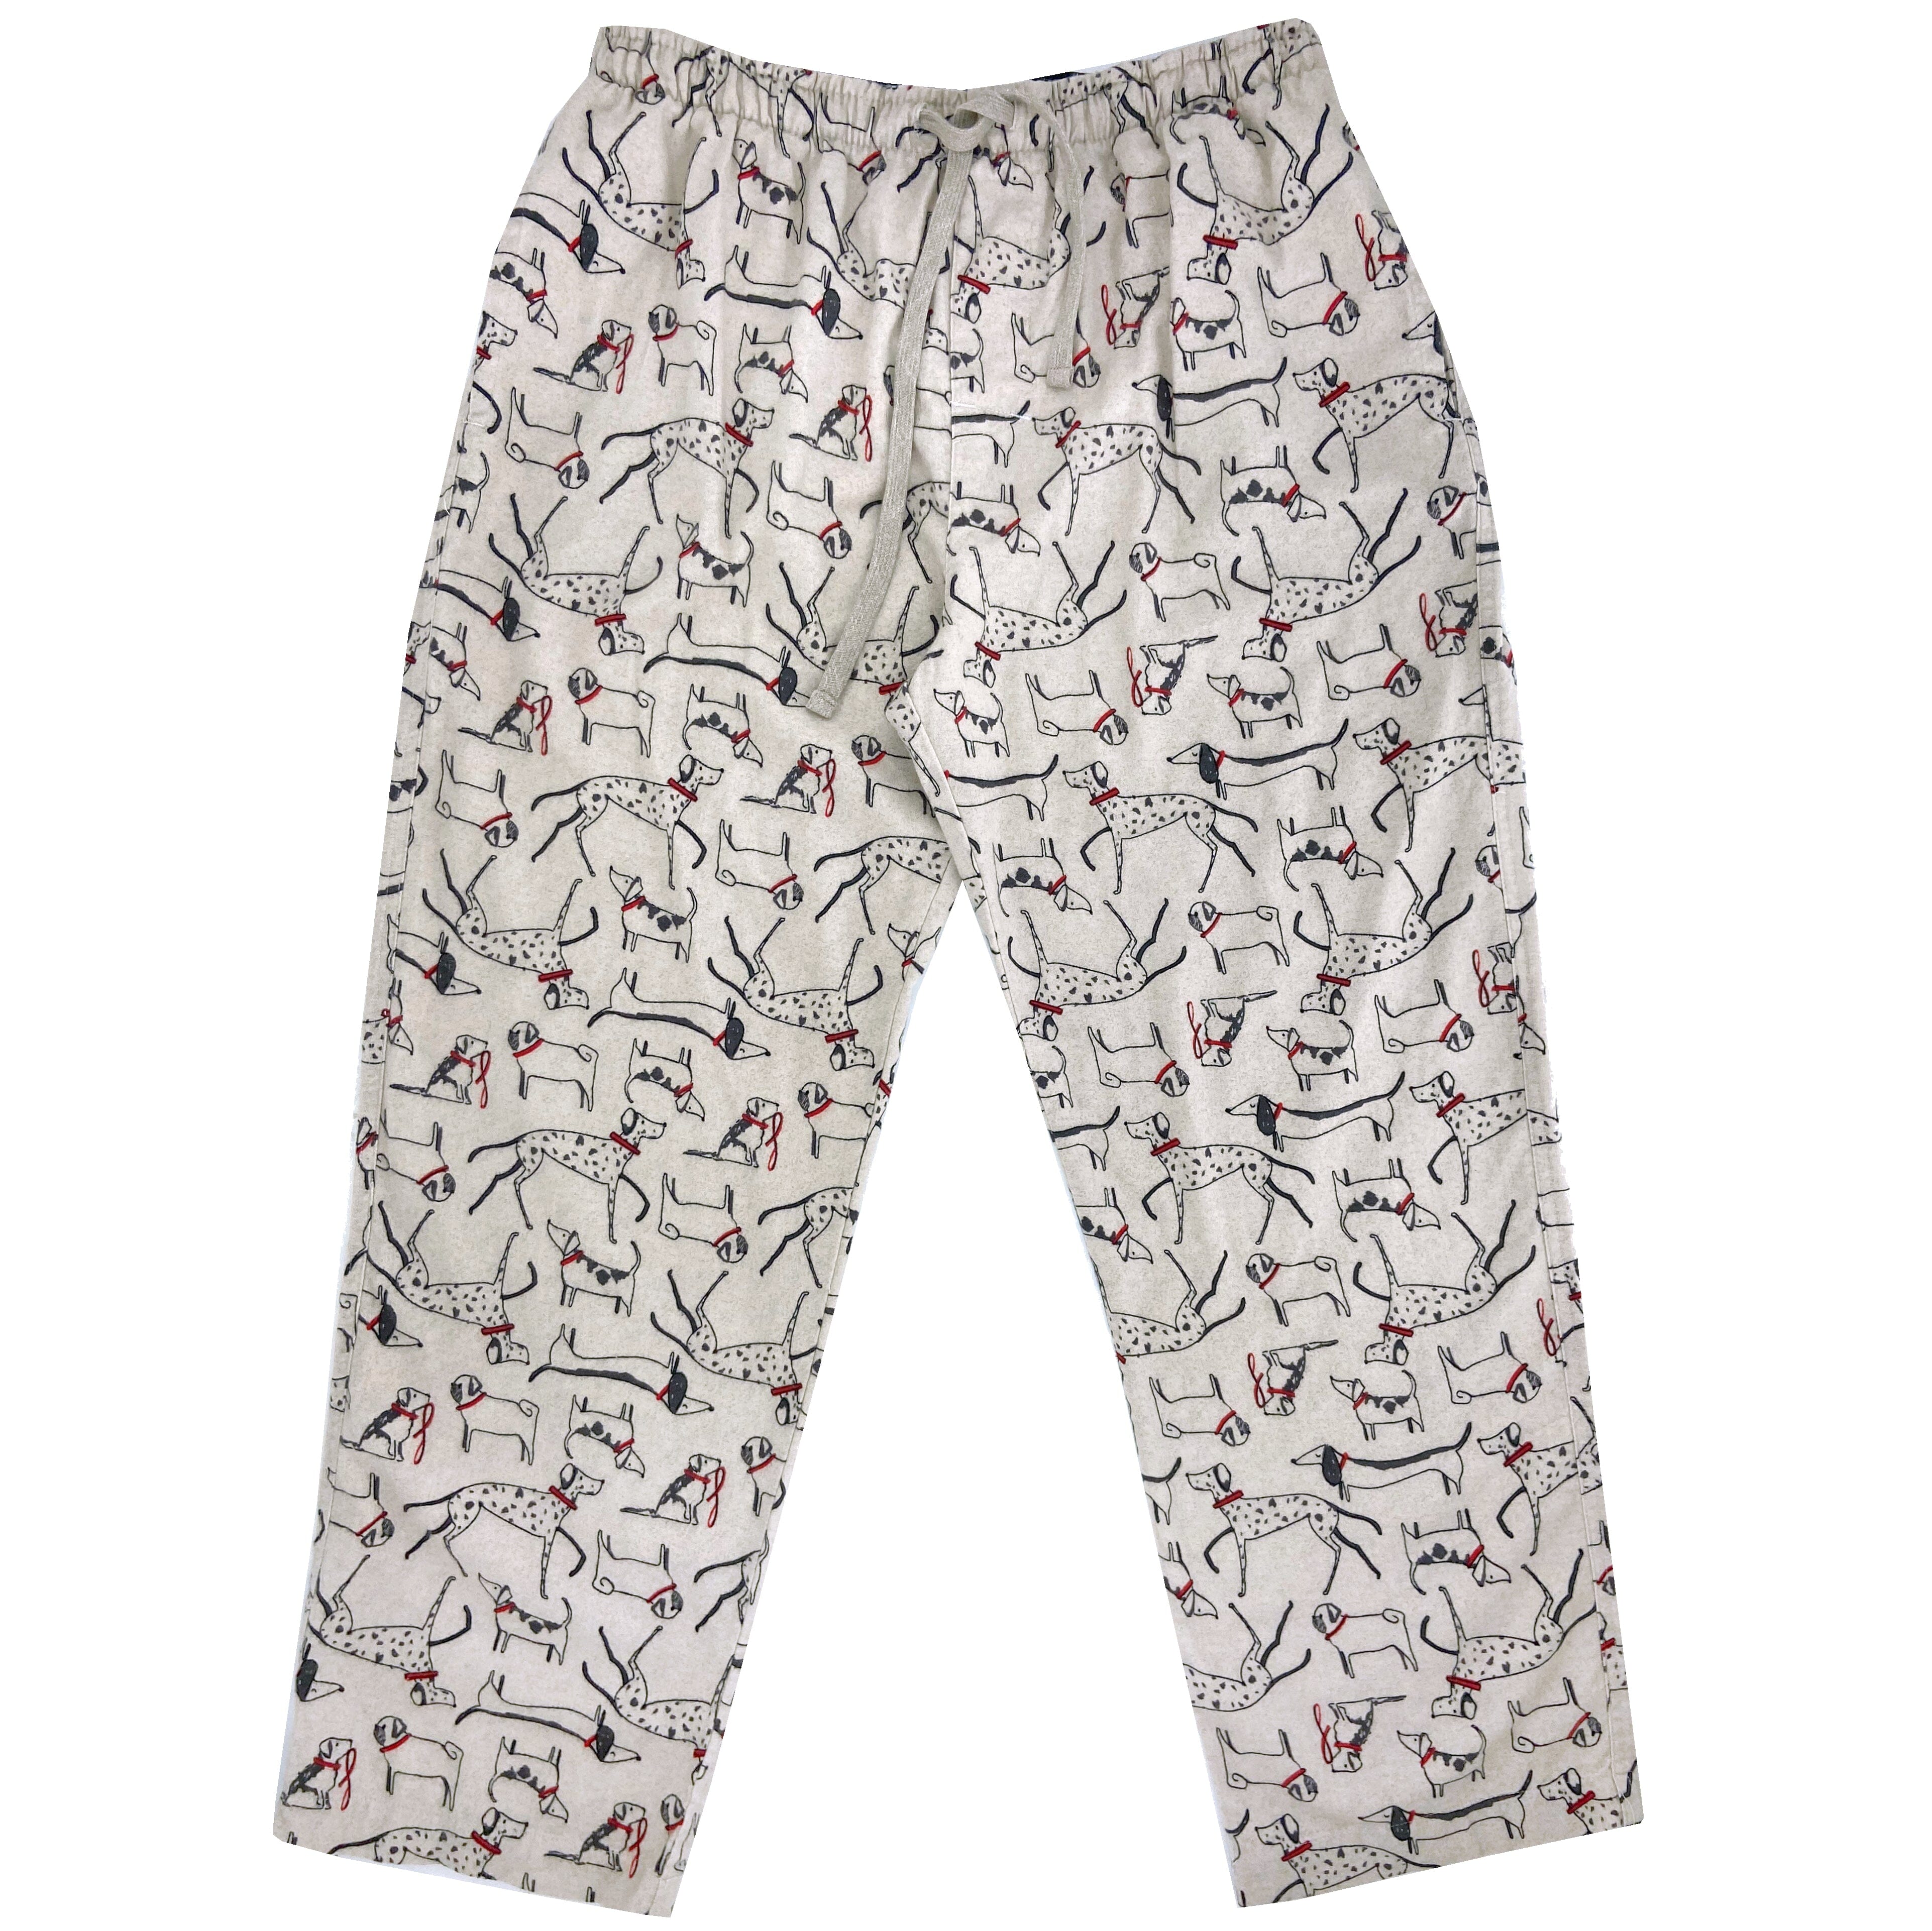 Comfies Pajama Pants - Beagle - Four Your Paws Only